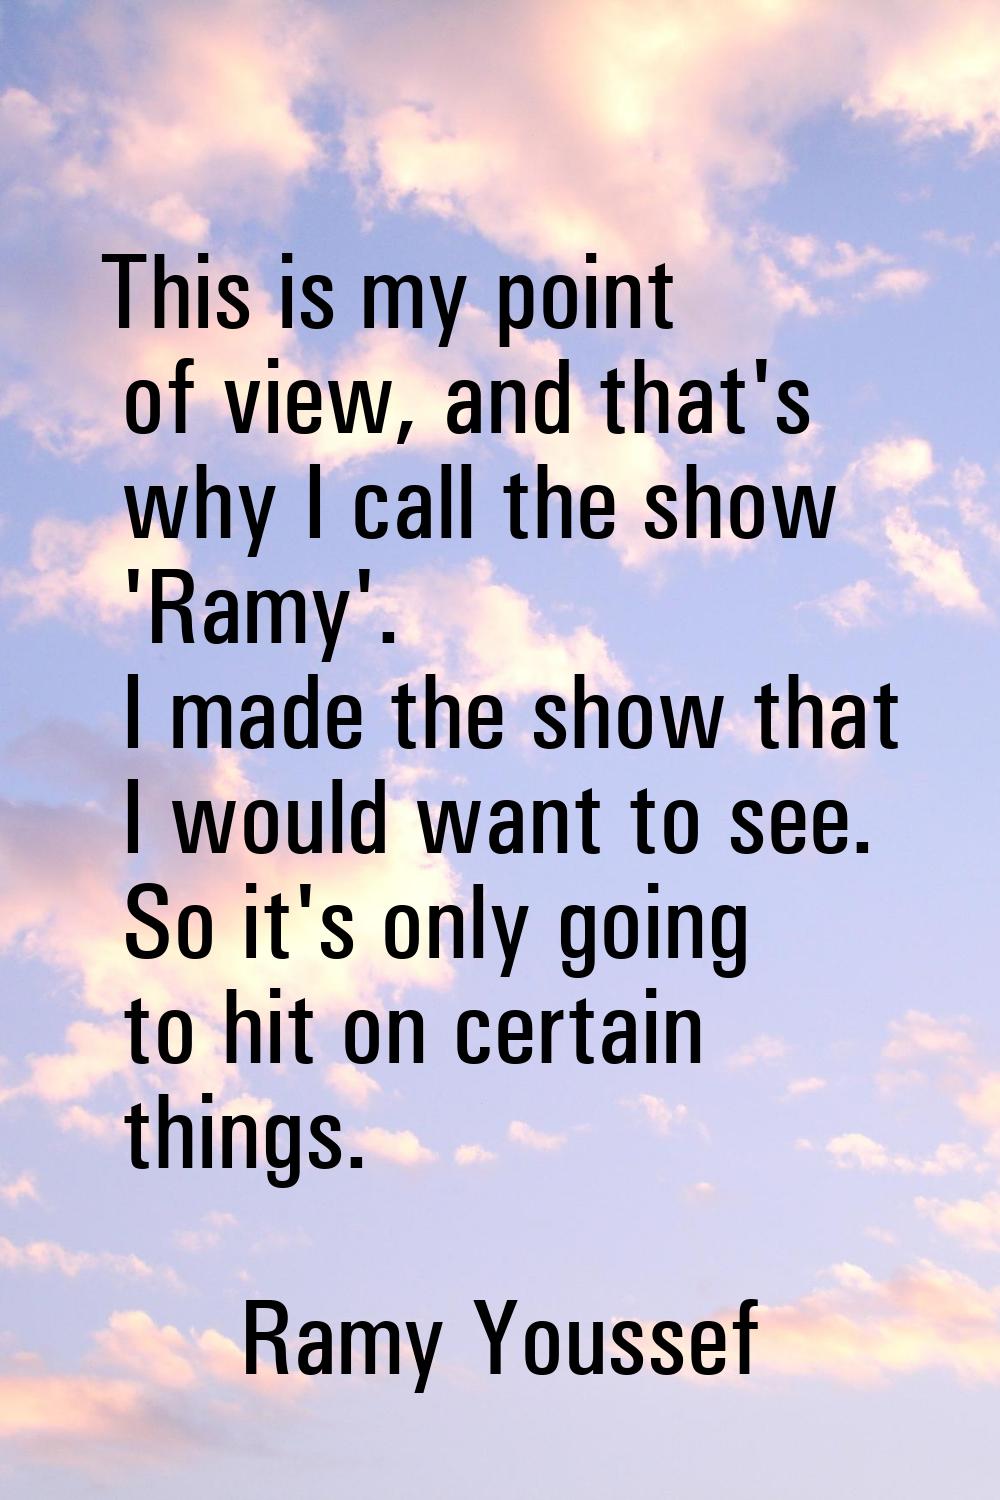 This is my point of view, and that's why I call the show 'Ramy'. I made the show that I would want 